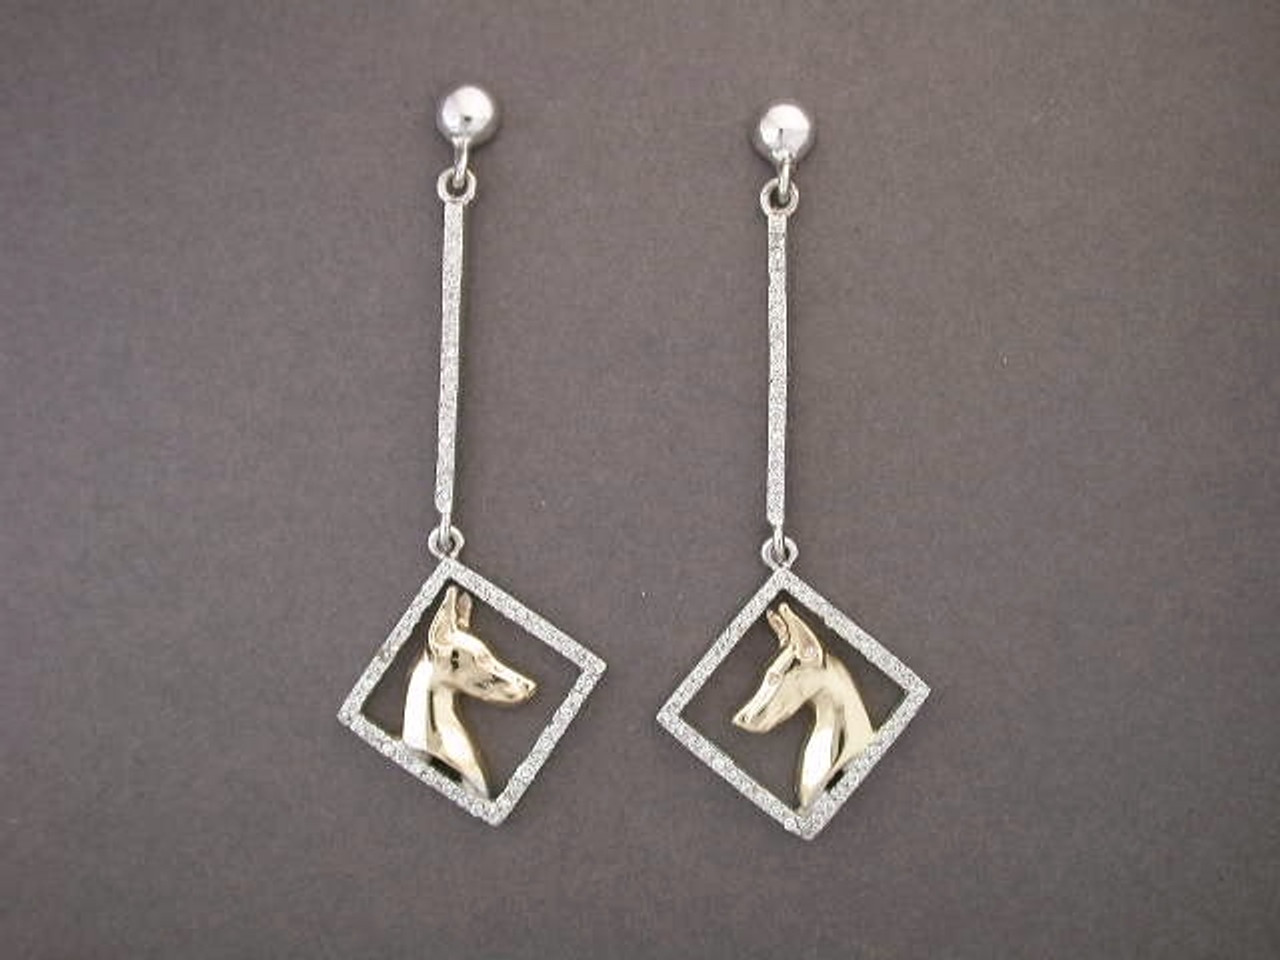 Earrings 1Mm Stone Square Post With Doberman